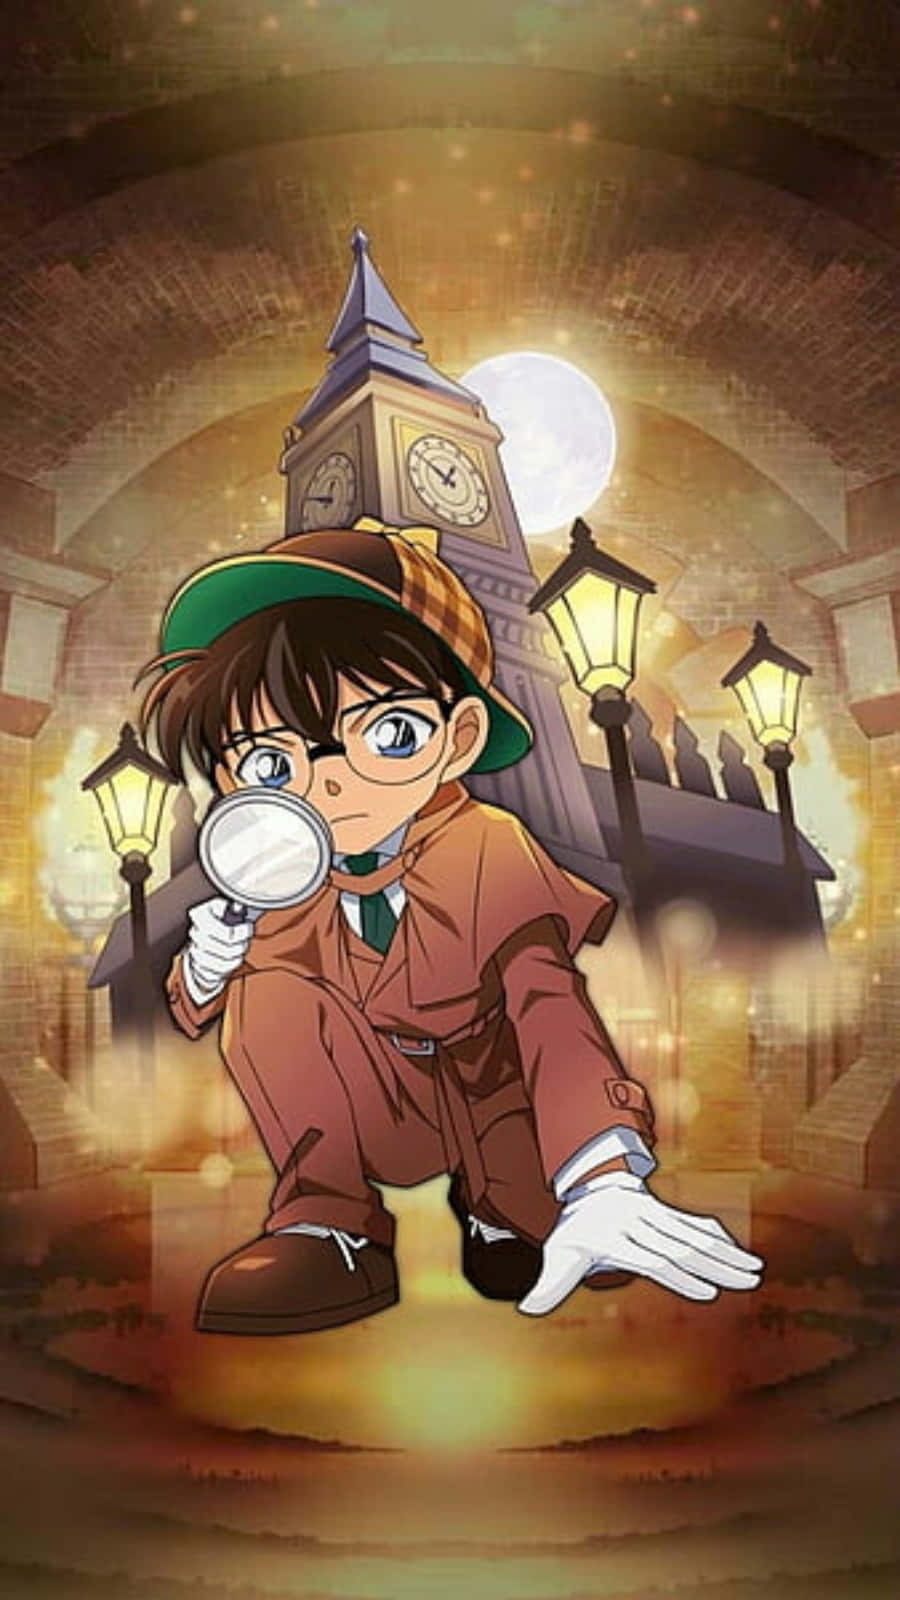 "Sleuthing with style: Detective Conan on the case"